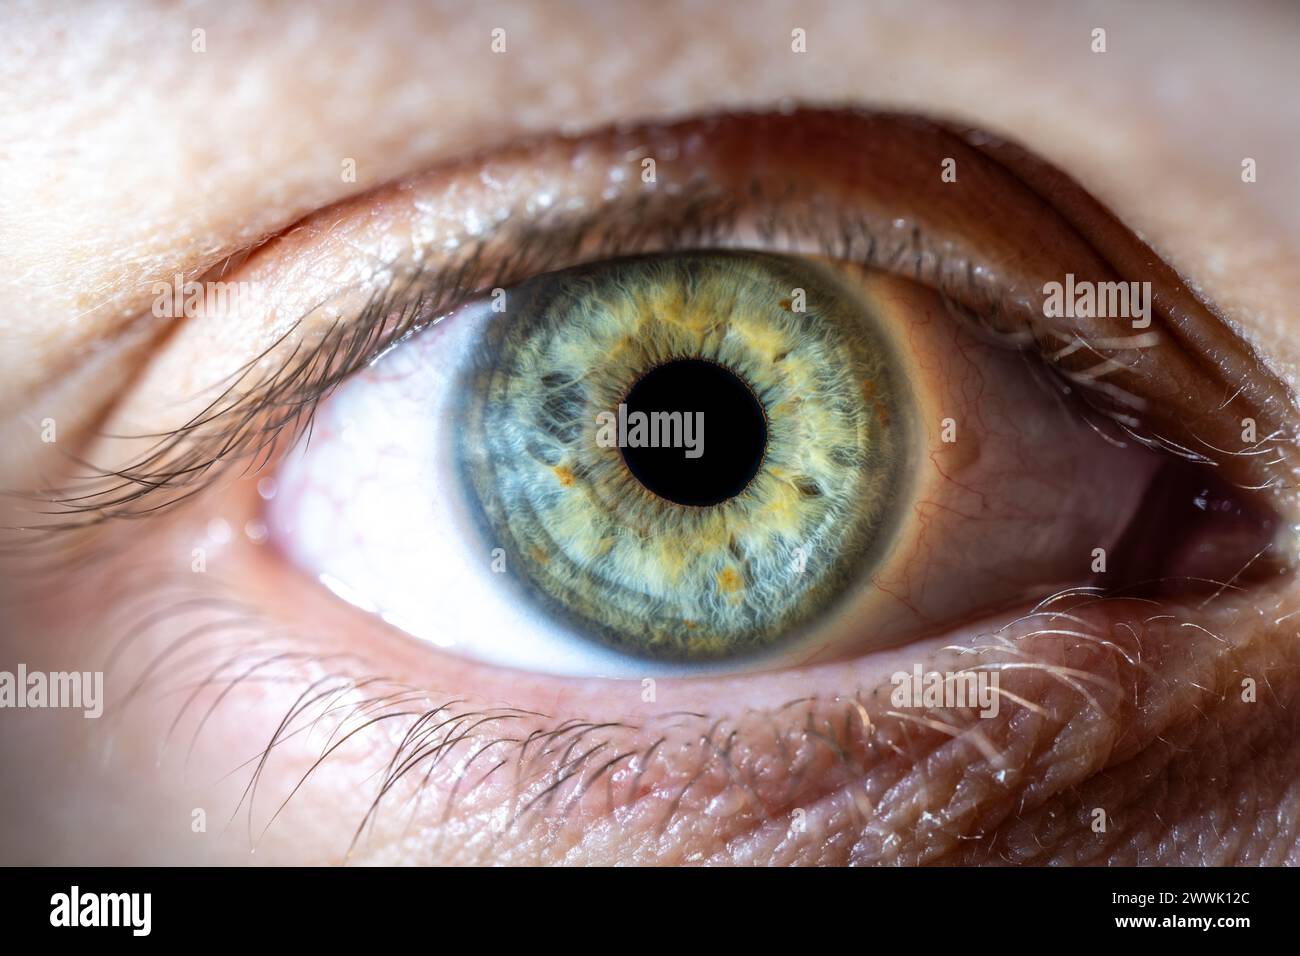 Description: Female Blue-Green Colored Eye with brown pigment spots. Pupil Opened. Close Up. Structural Anatomy. Human Iris Macro Detail. Stock Photo